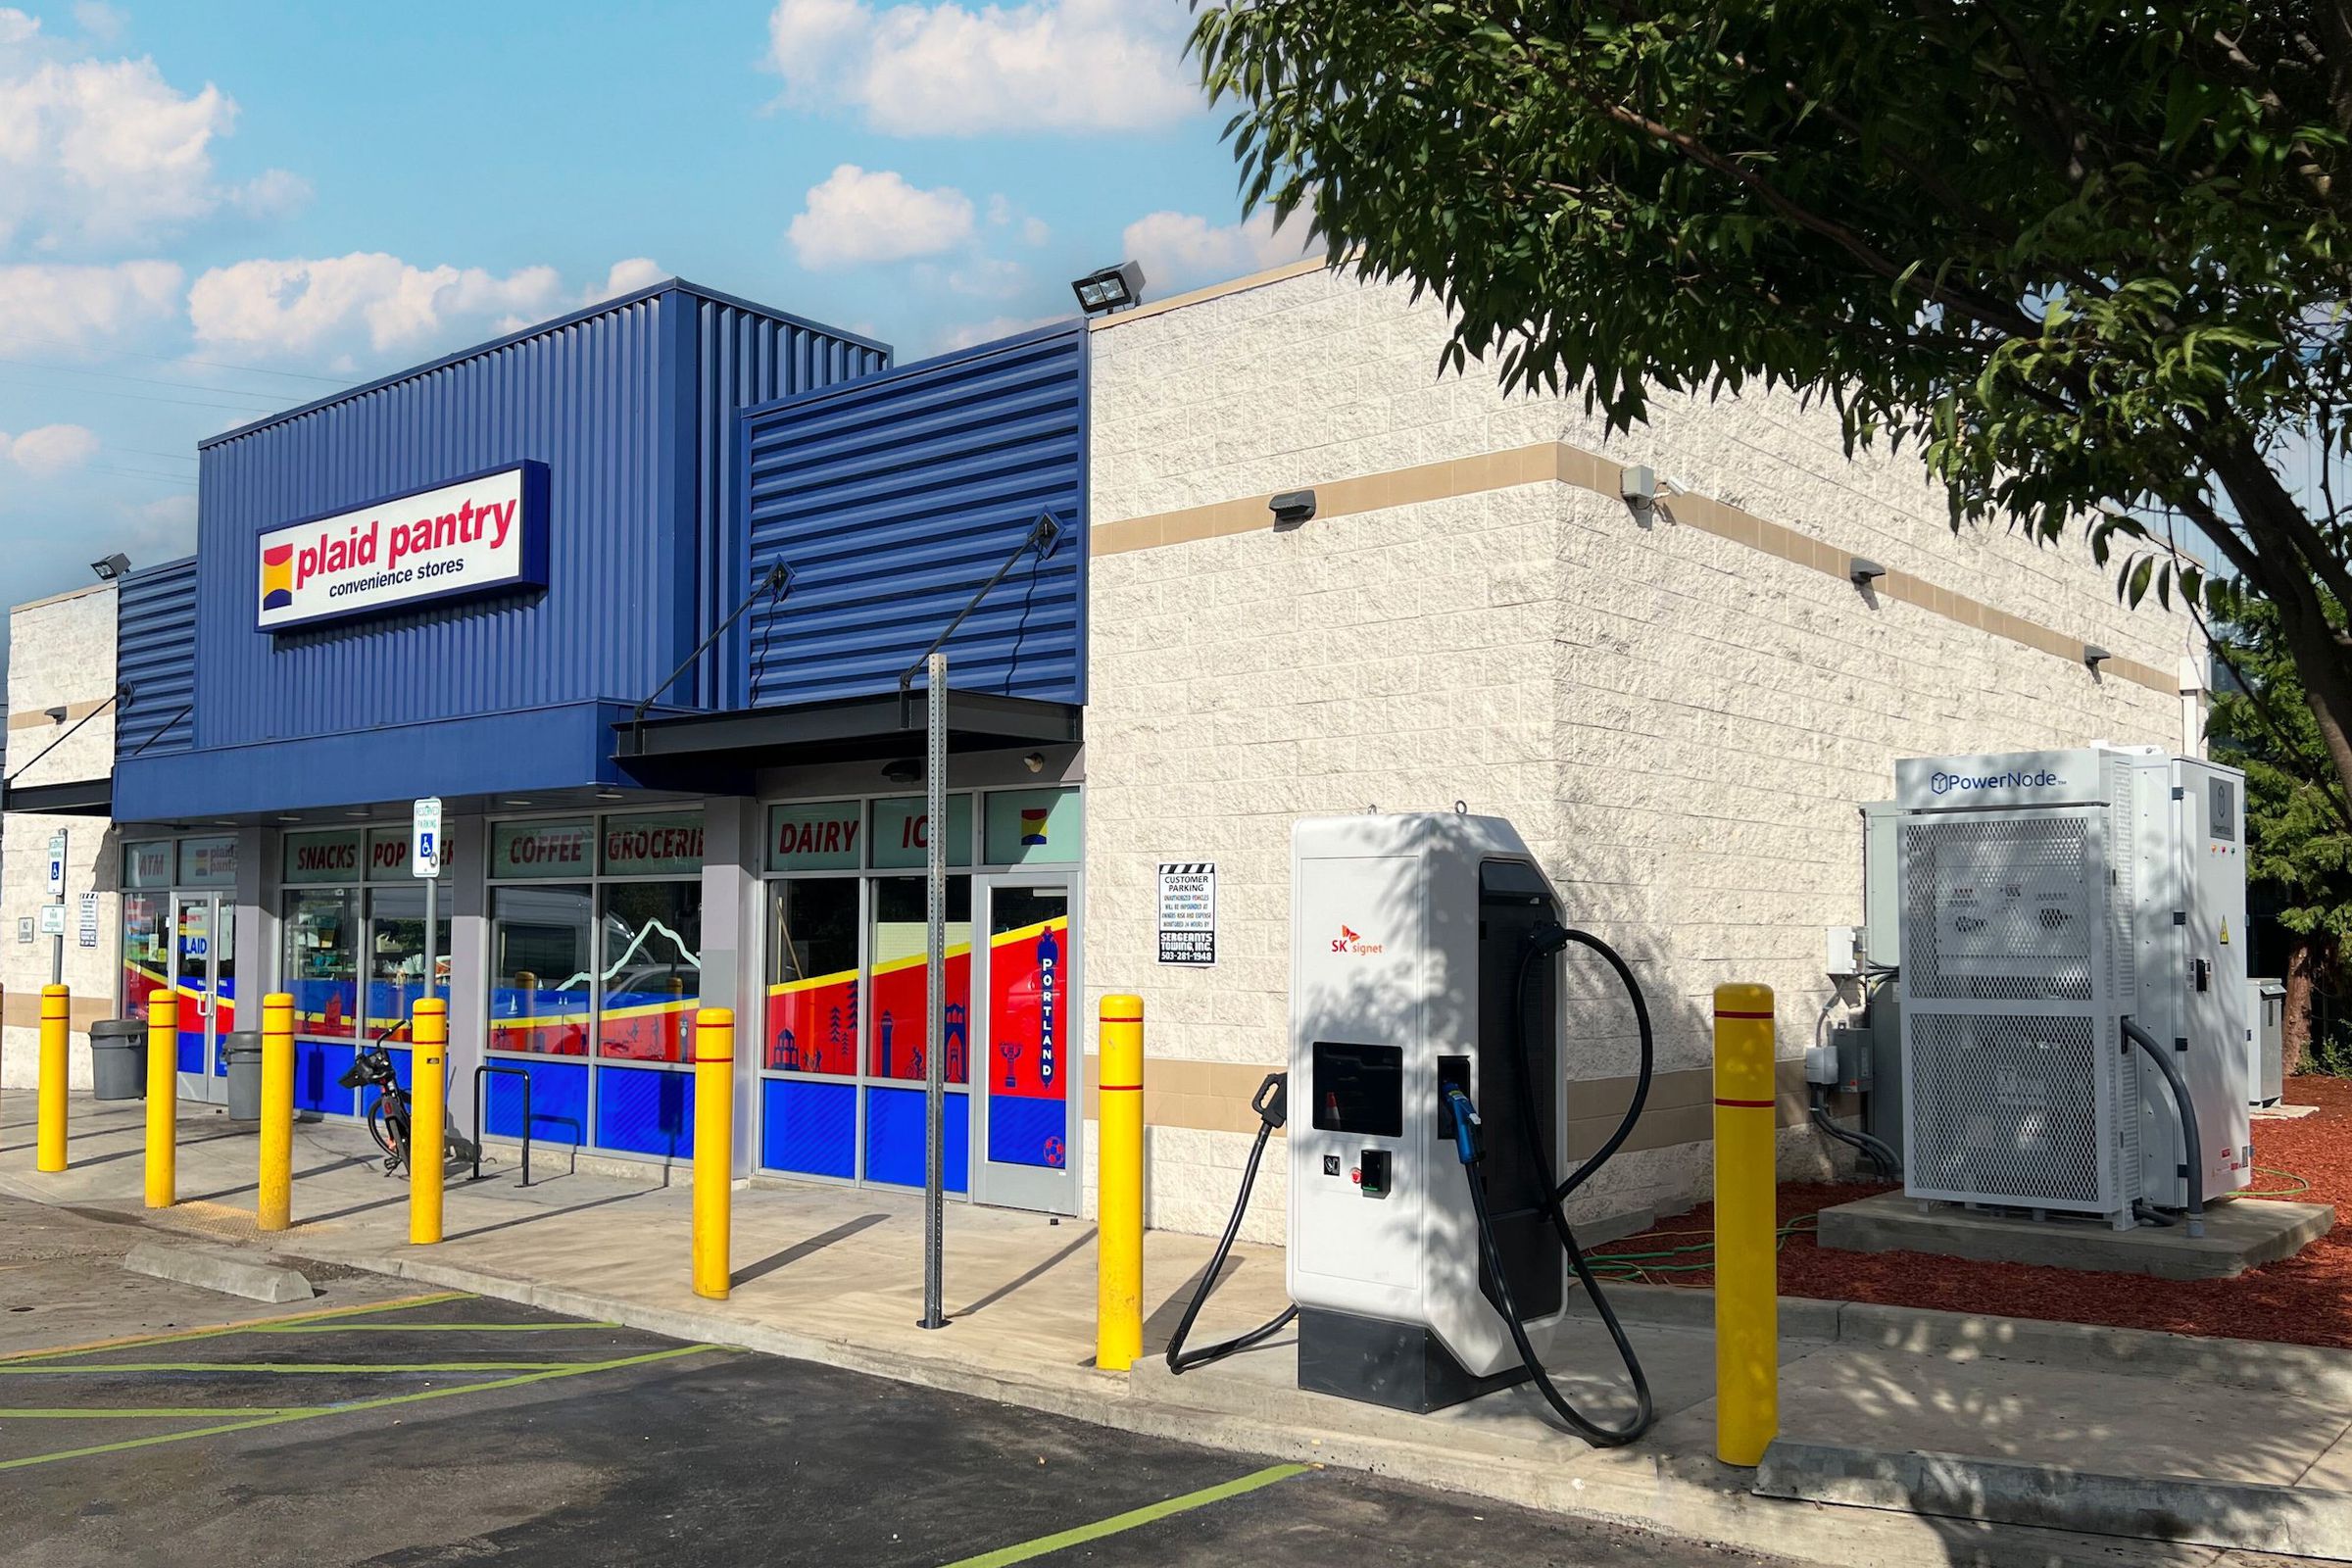 paid pantry convenience store from with parking spots and one ev charger and a transformer box at the side of the building